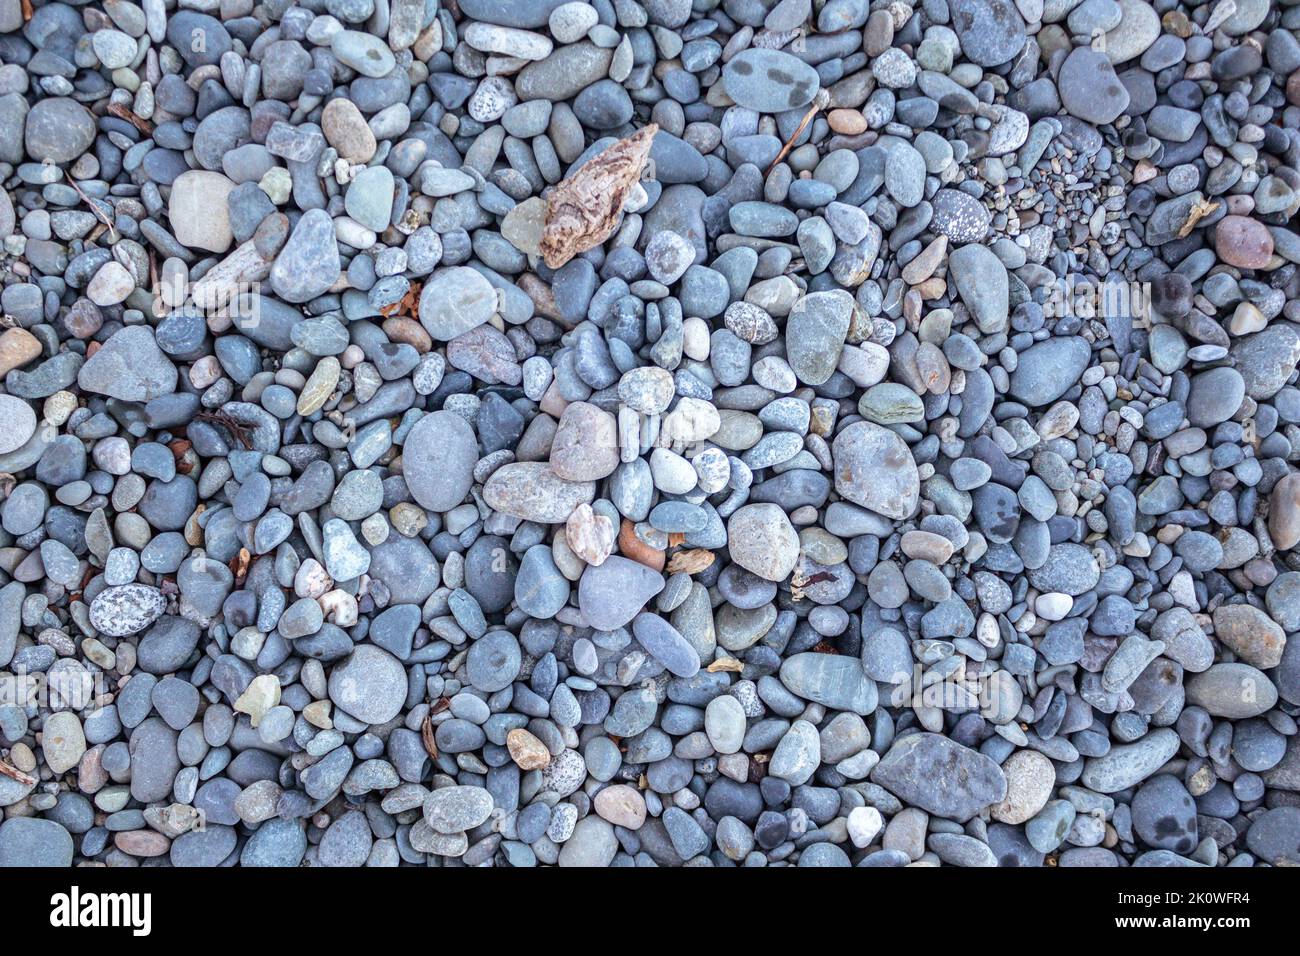 Stones pattern. Decorative white grey blue stones, round stones background , Stones or Gravel for building, floor or wall. Pebbles Texture Stock Photo